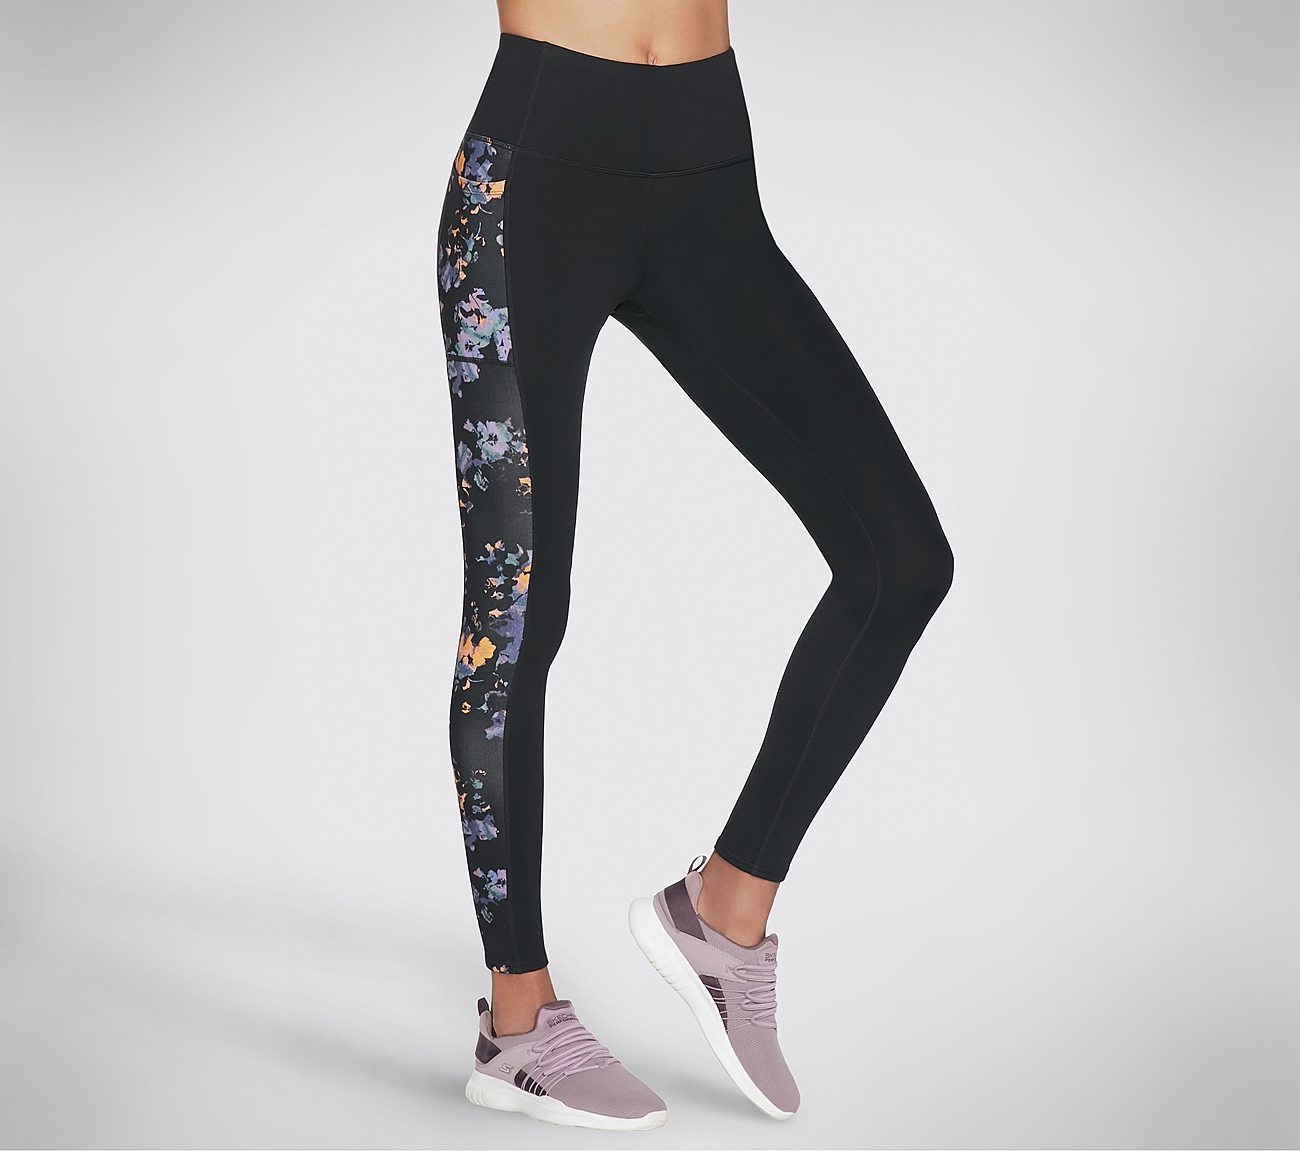 Blue Track Pants For Women  All Purpose Pants  Shop Now at InWearin